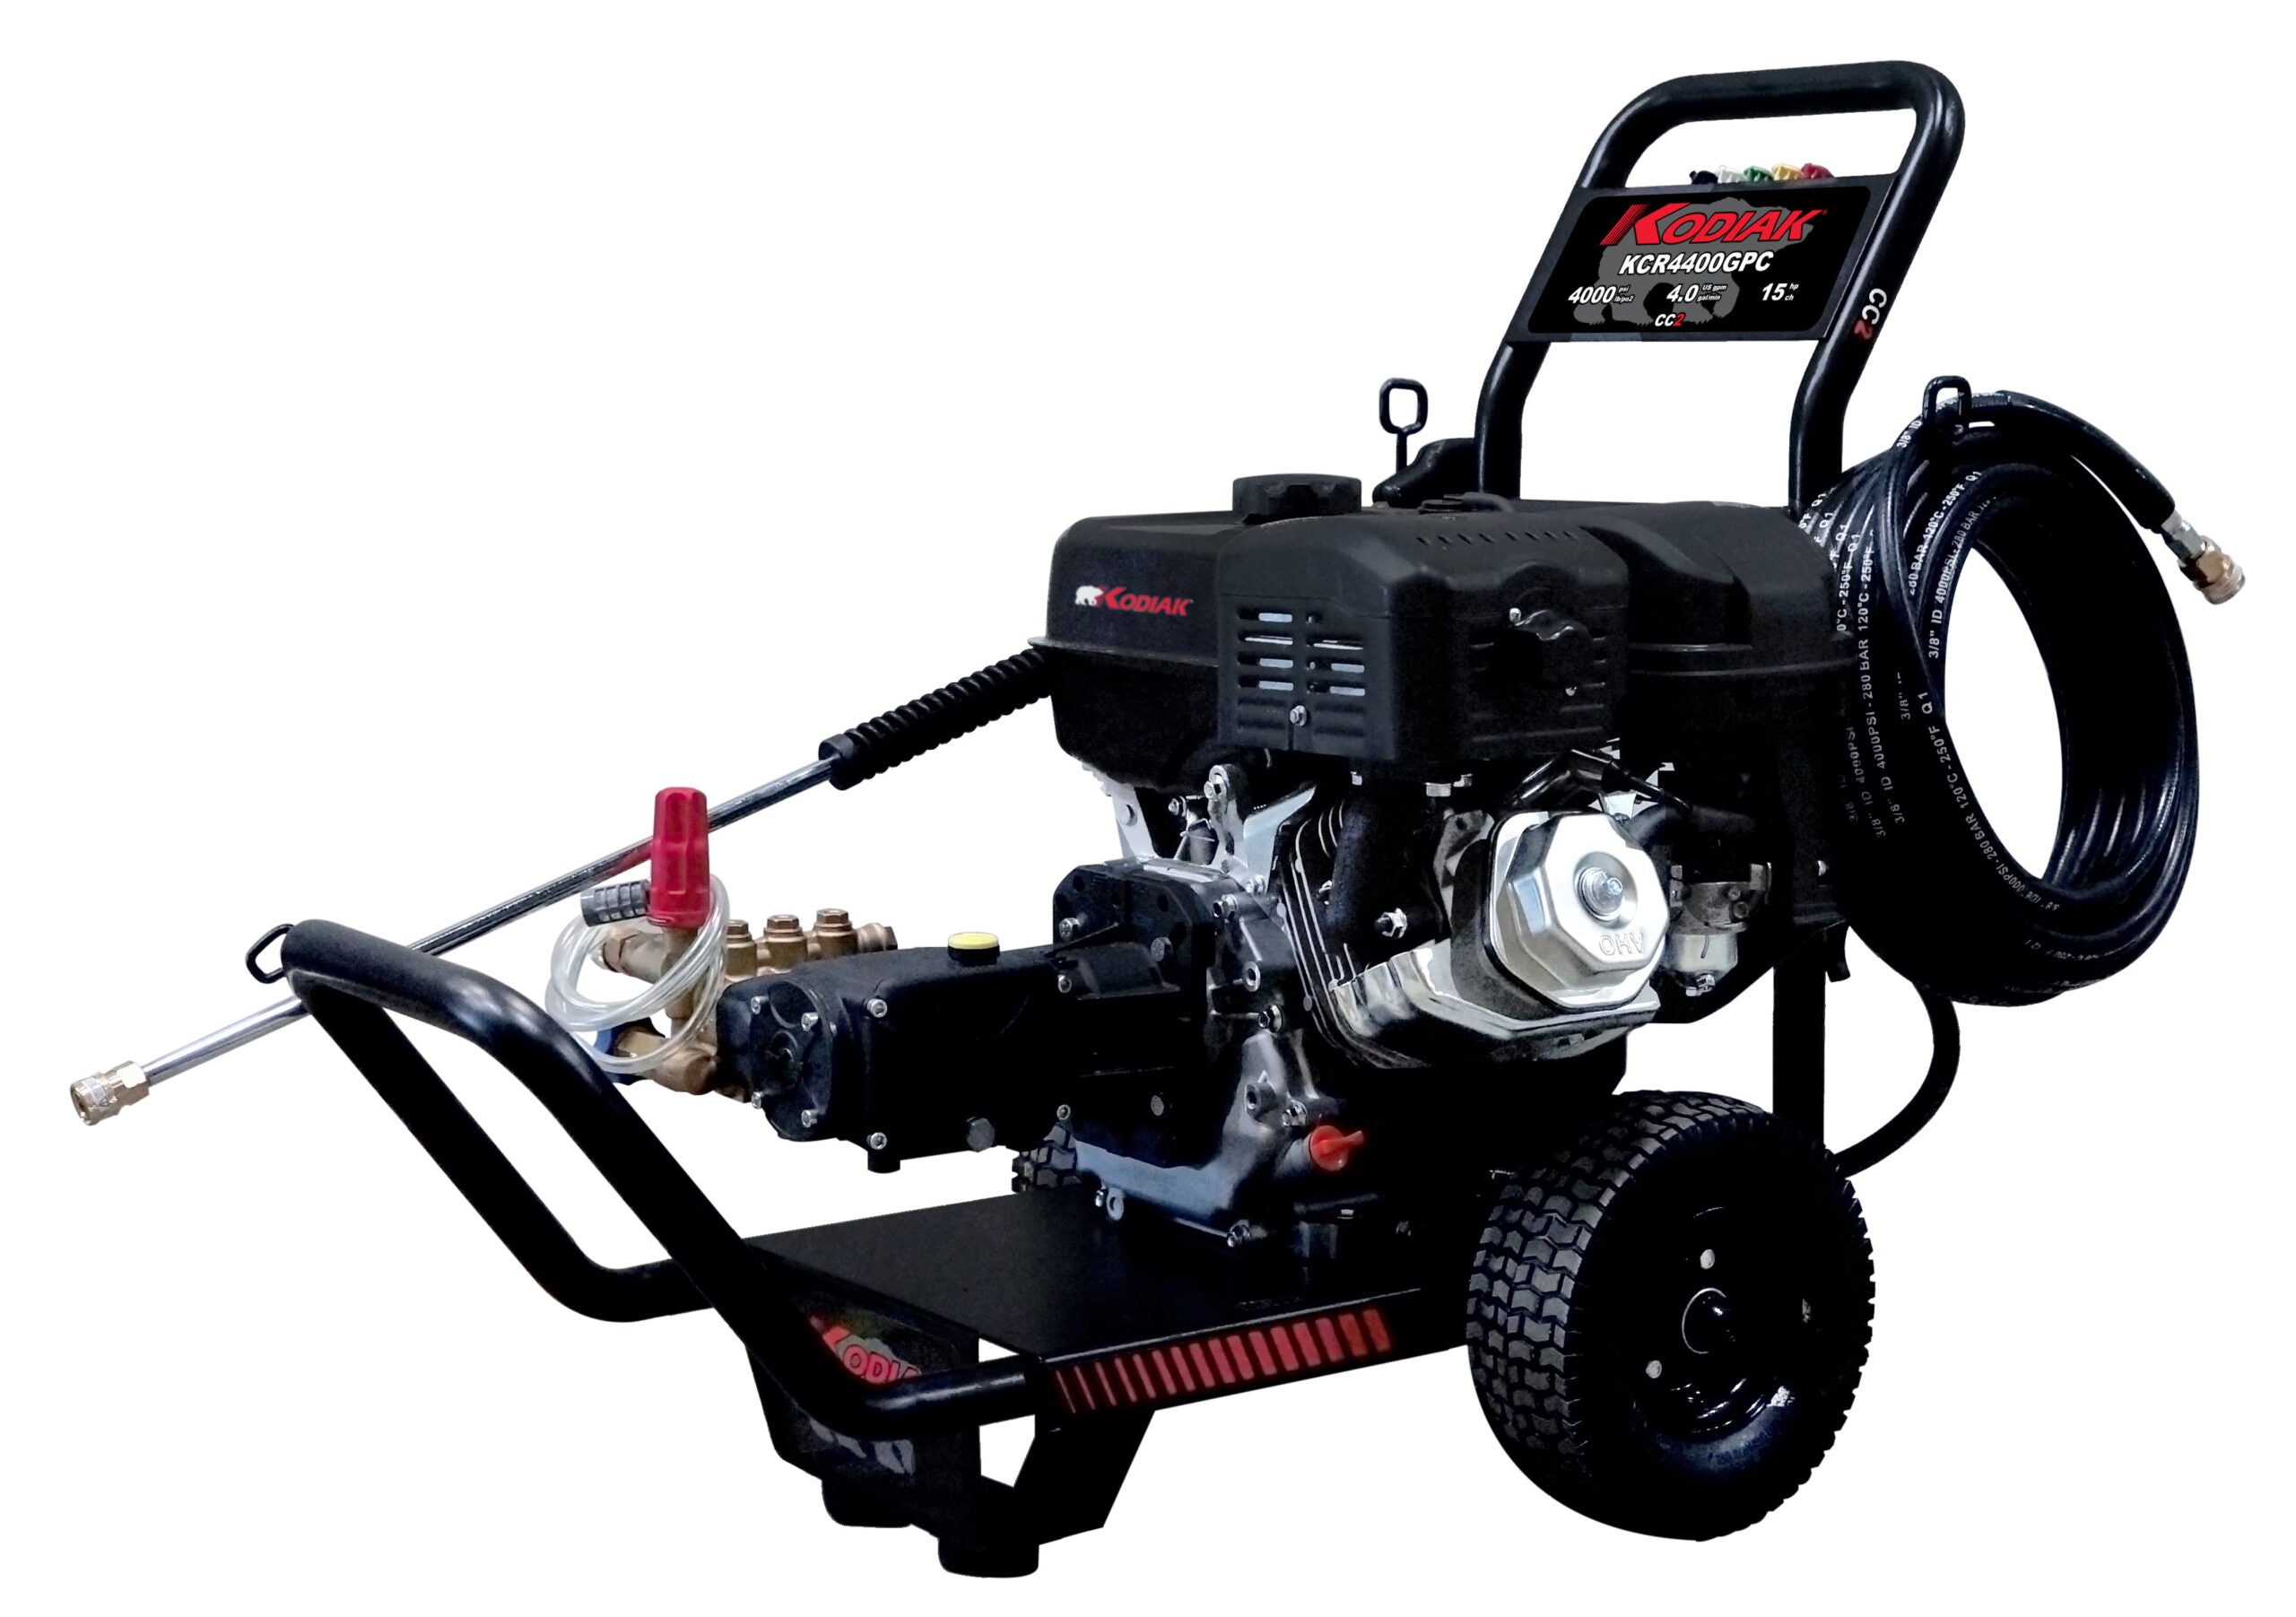 Cold Water Industrial Grade 15 HP Gas Engine Pressure Washer - 4000 PSI at 4.0 GPM